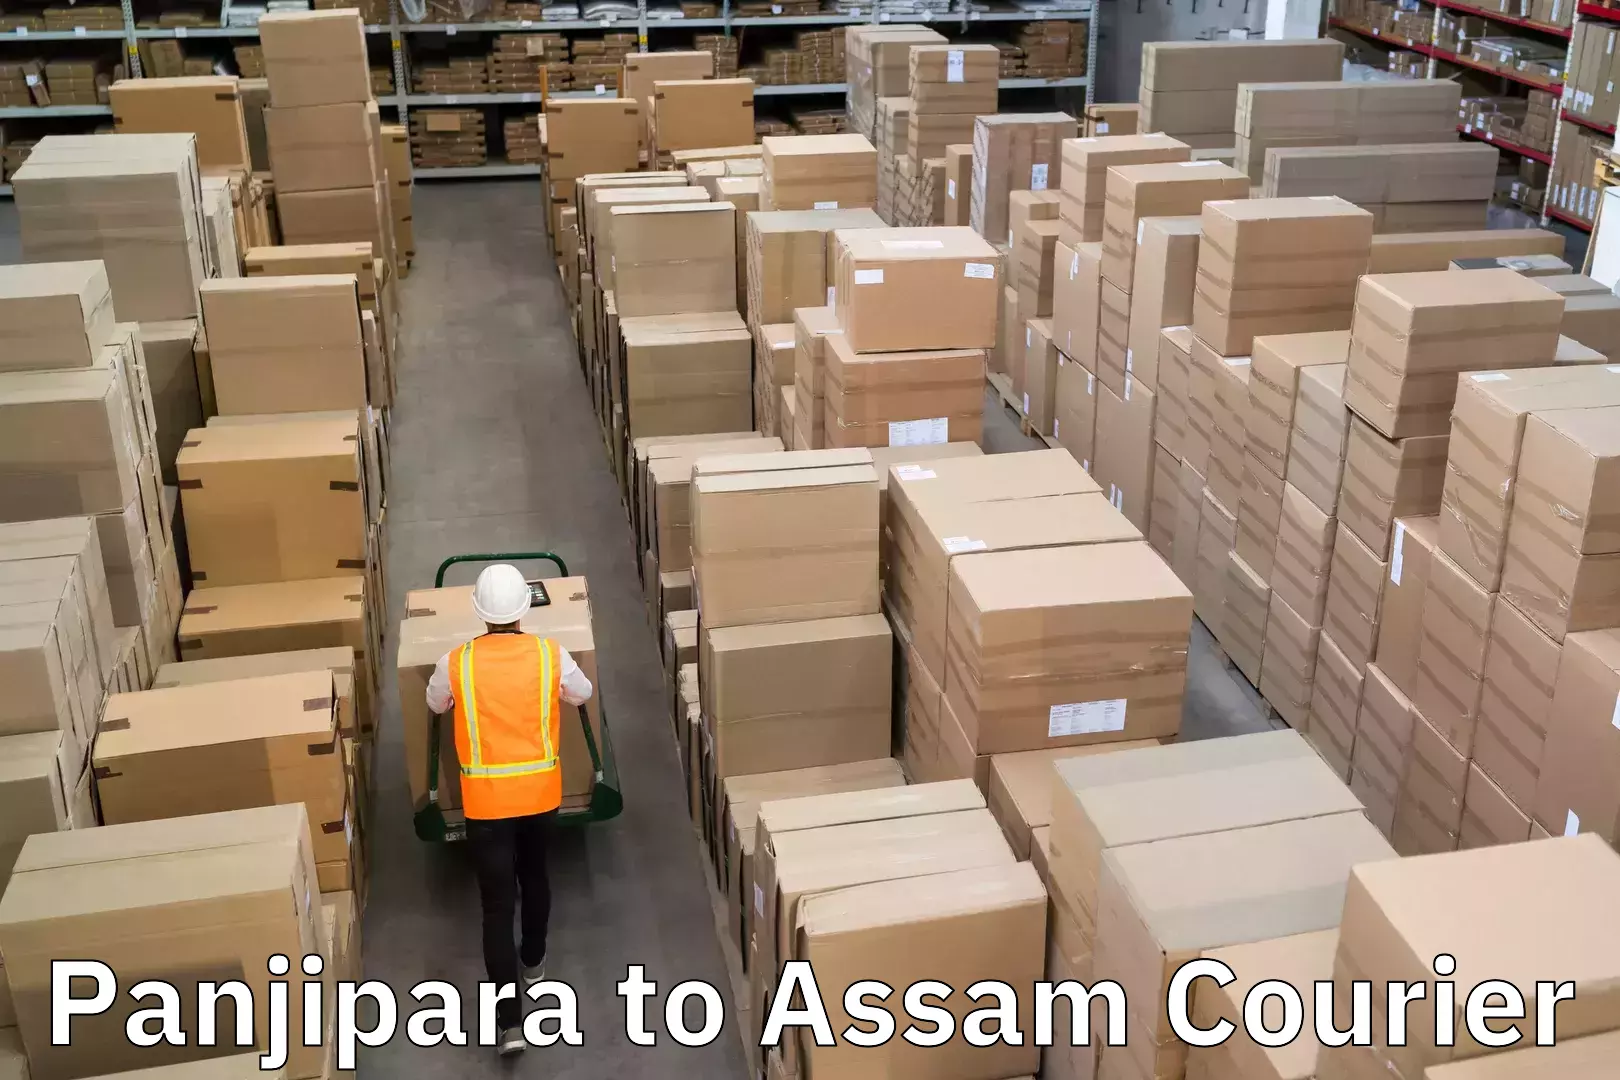 User-friendly delivery service Panjipara to Assam